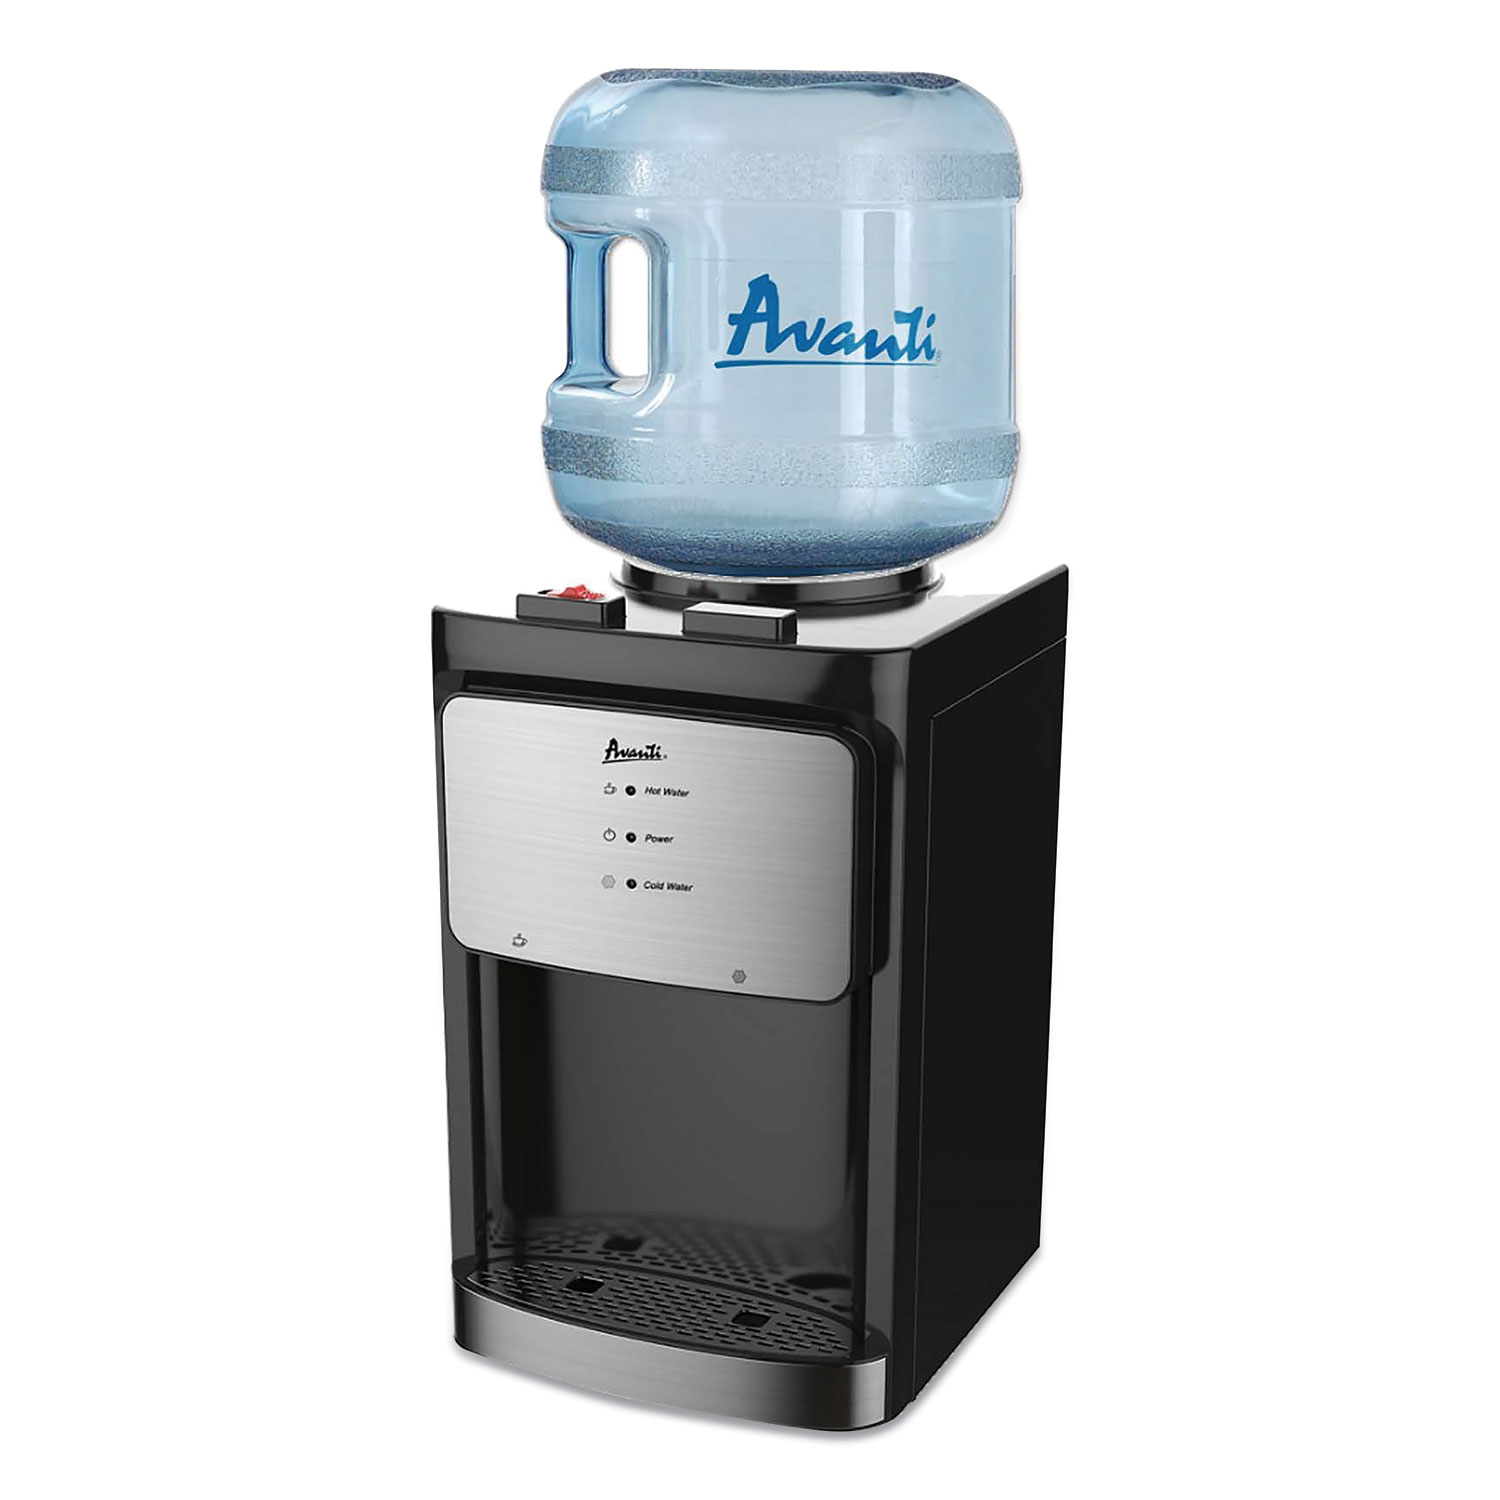  Avanti WDT40Q3S-IS Counter Top Thermoelectric Hot and Cold Water Dispenser, 3 to 5 gal, 12 x 13 x 20, Black (AVAWDT40Q3SIS) 